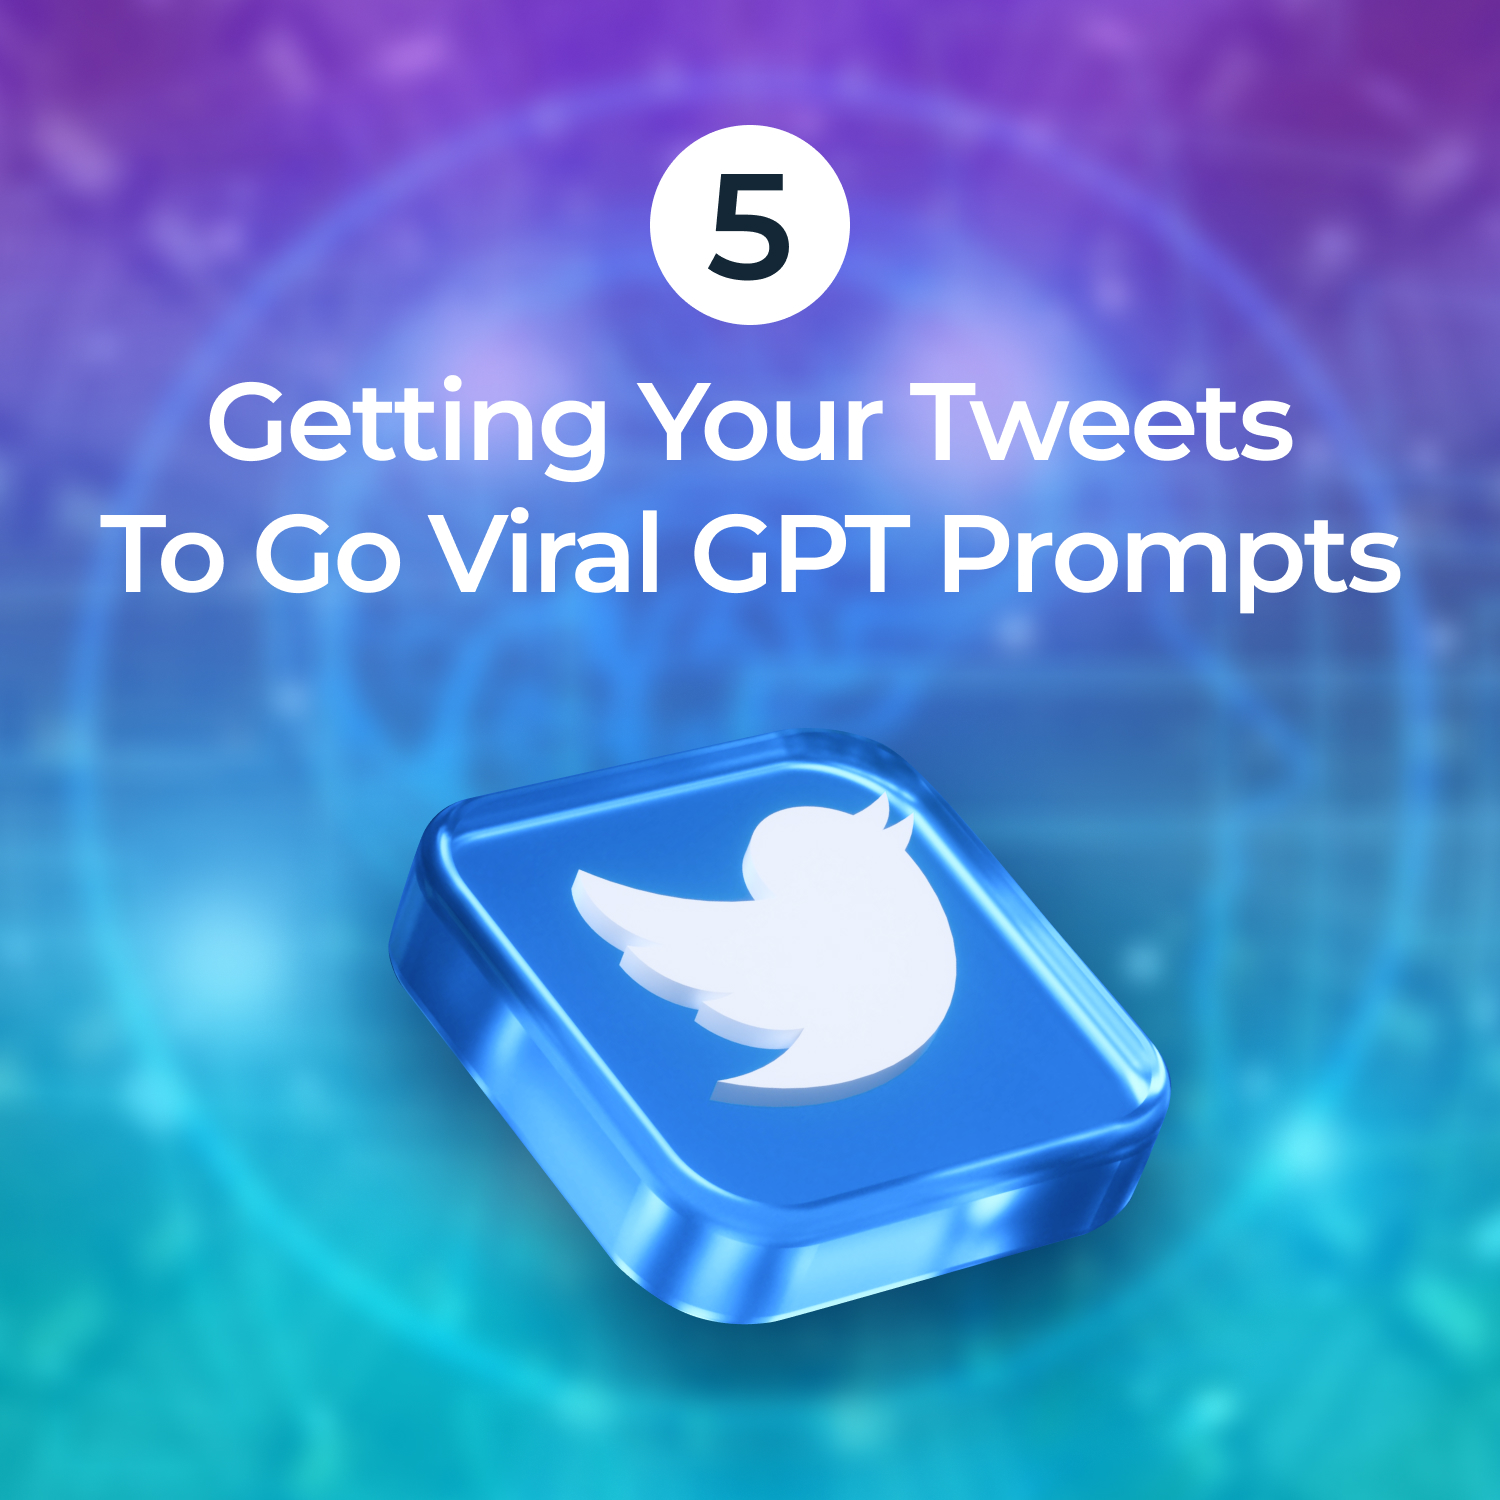 5 getting your tweets to go viral gpt prompts 365